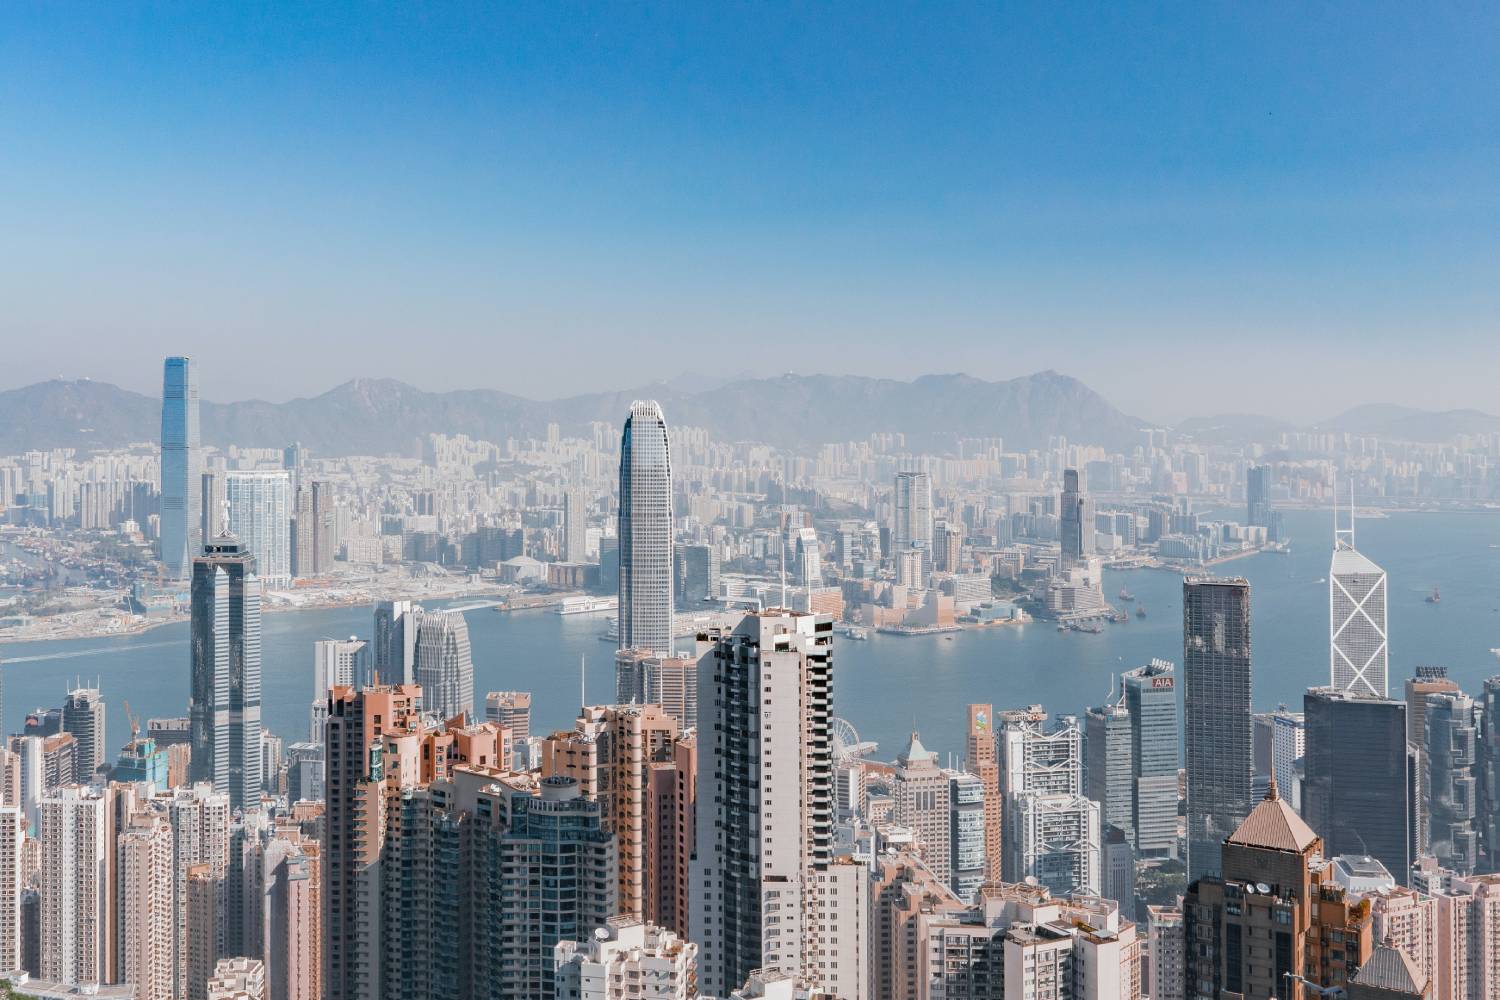 CWK Global’s highlights for the 2022/23 Hong Kong Budget